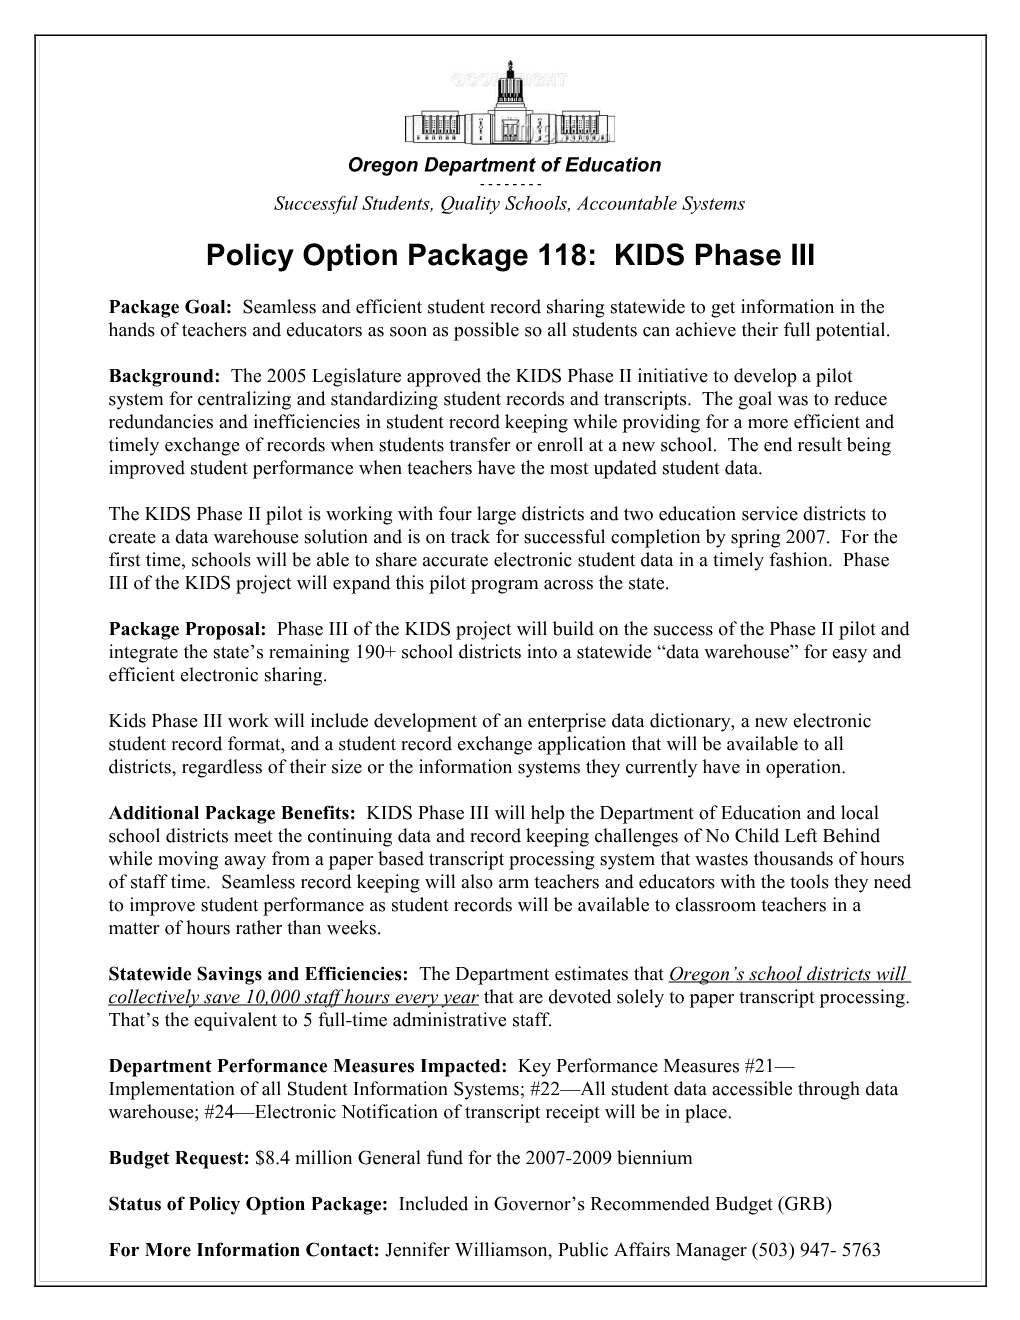 Oregon Department of Education Policy Option